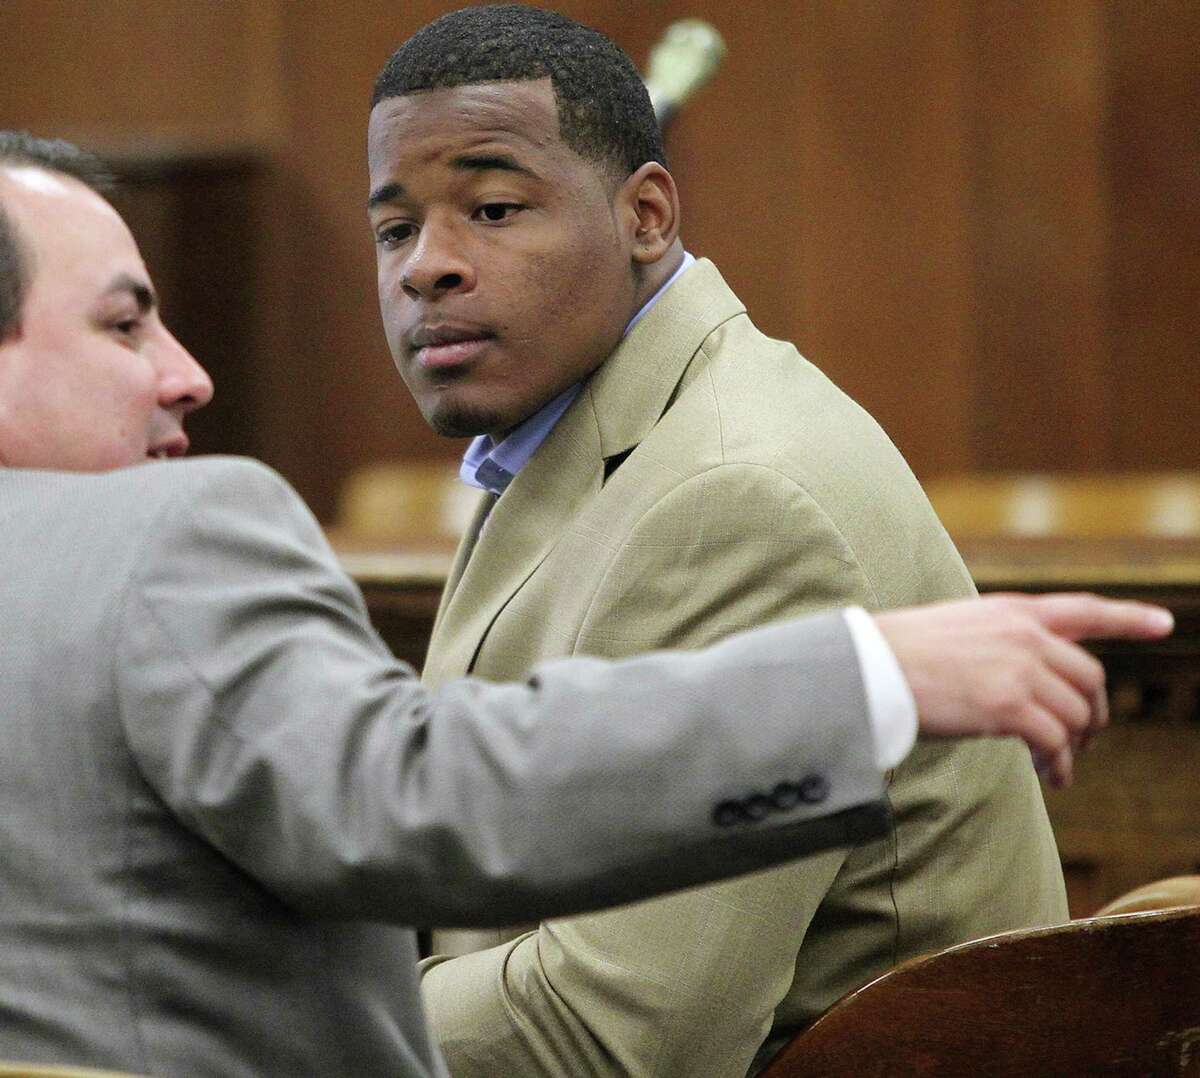 In this Jan. 23, 2014 photo, former Baylor football player Tevin Elliott waits with a unidentified lawyer in a McLennan county courtroom in Waco, Texas. According to an ESPN report released on Sunday, Jan. 31, 2016, Baylor University failed to act on complaints by three female students who said they were sexually assaulted by the former football player later convicted in one of those cases. In a statement on Monday, Baylor said that the school investigates all complaints of sexual assault. (Jerry Larson/Waco Tribune Herald via AP)